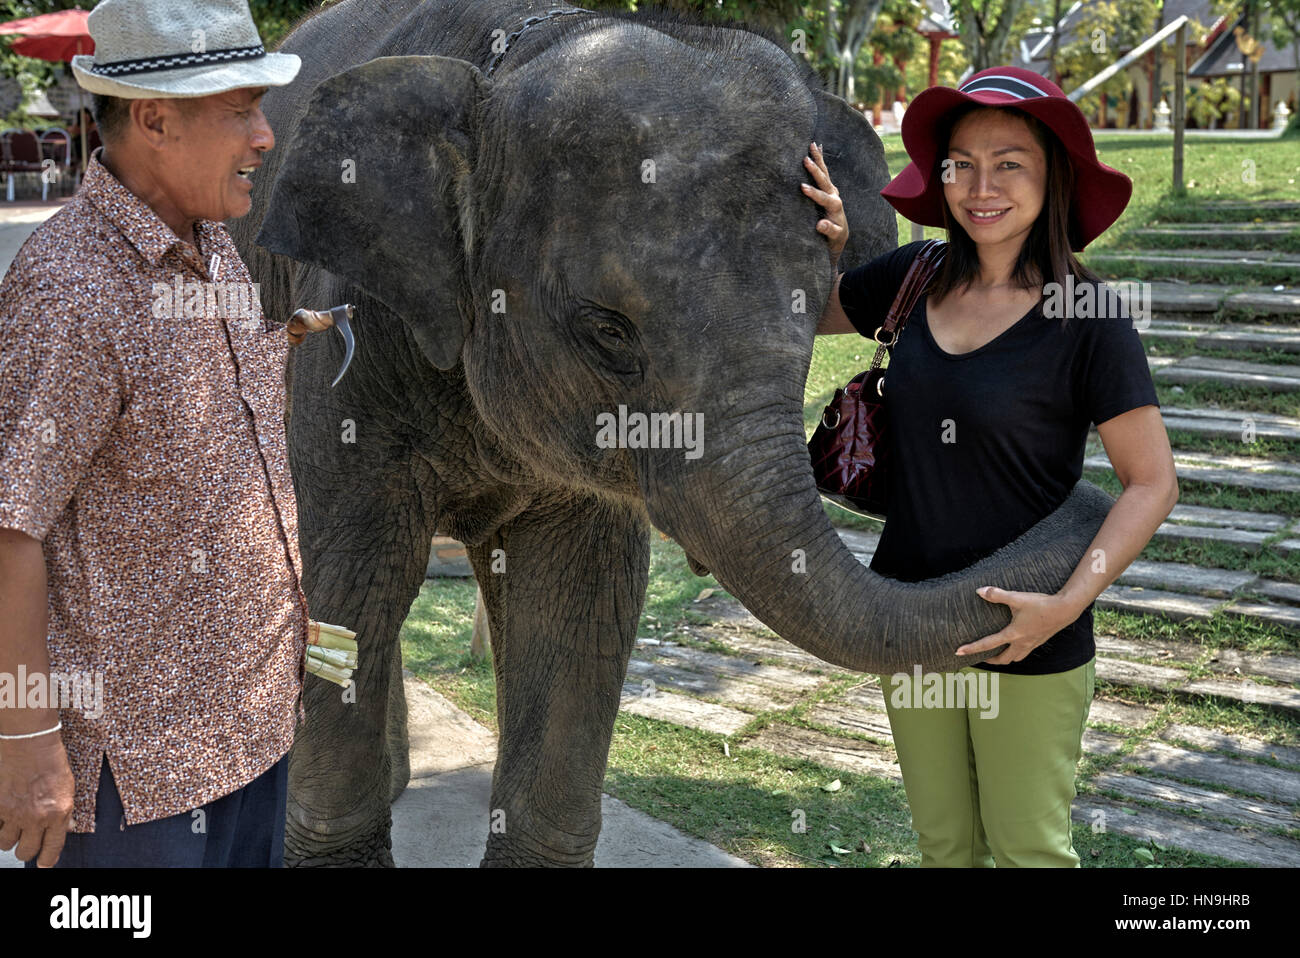 Elephant Thailand. Woman tourist  posing for photographs with a young Asian elephant. People Southeast Asia Stock Photo